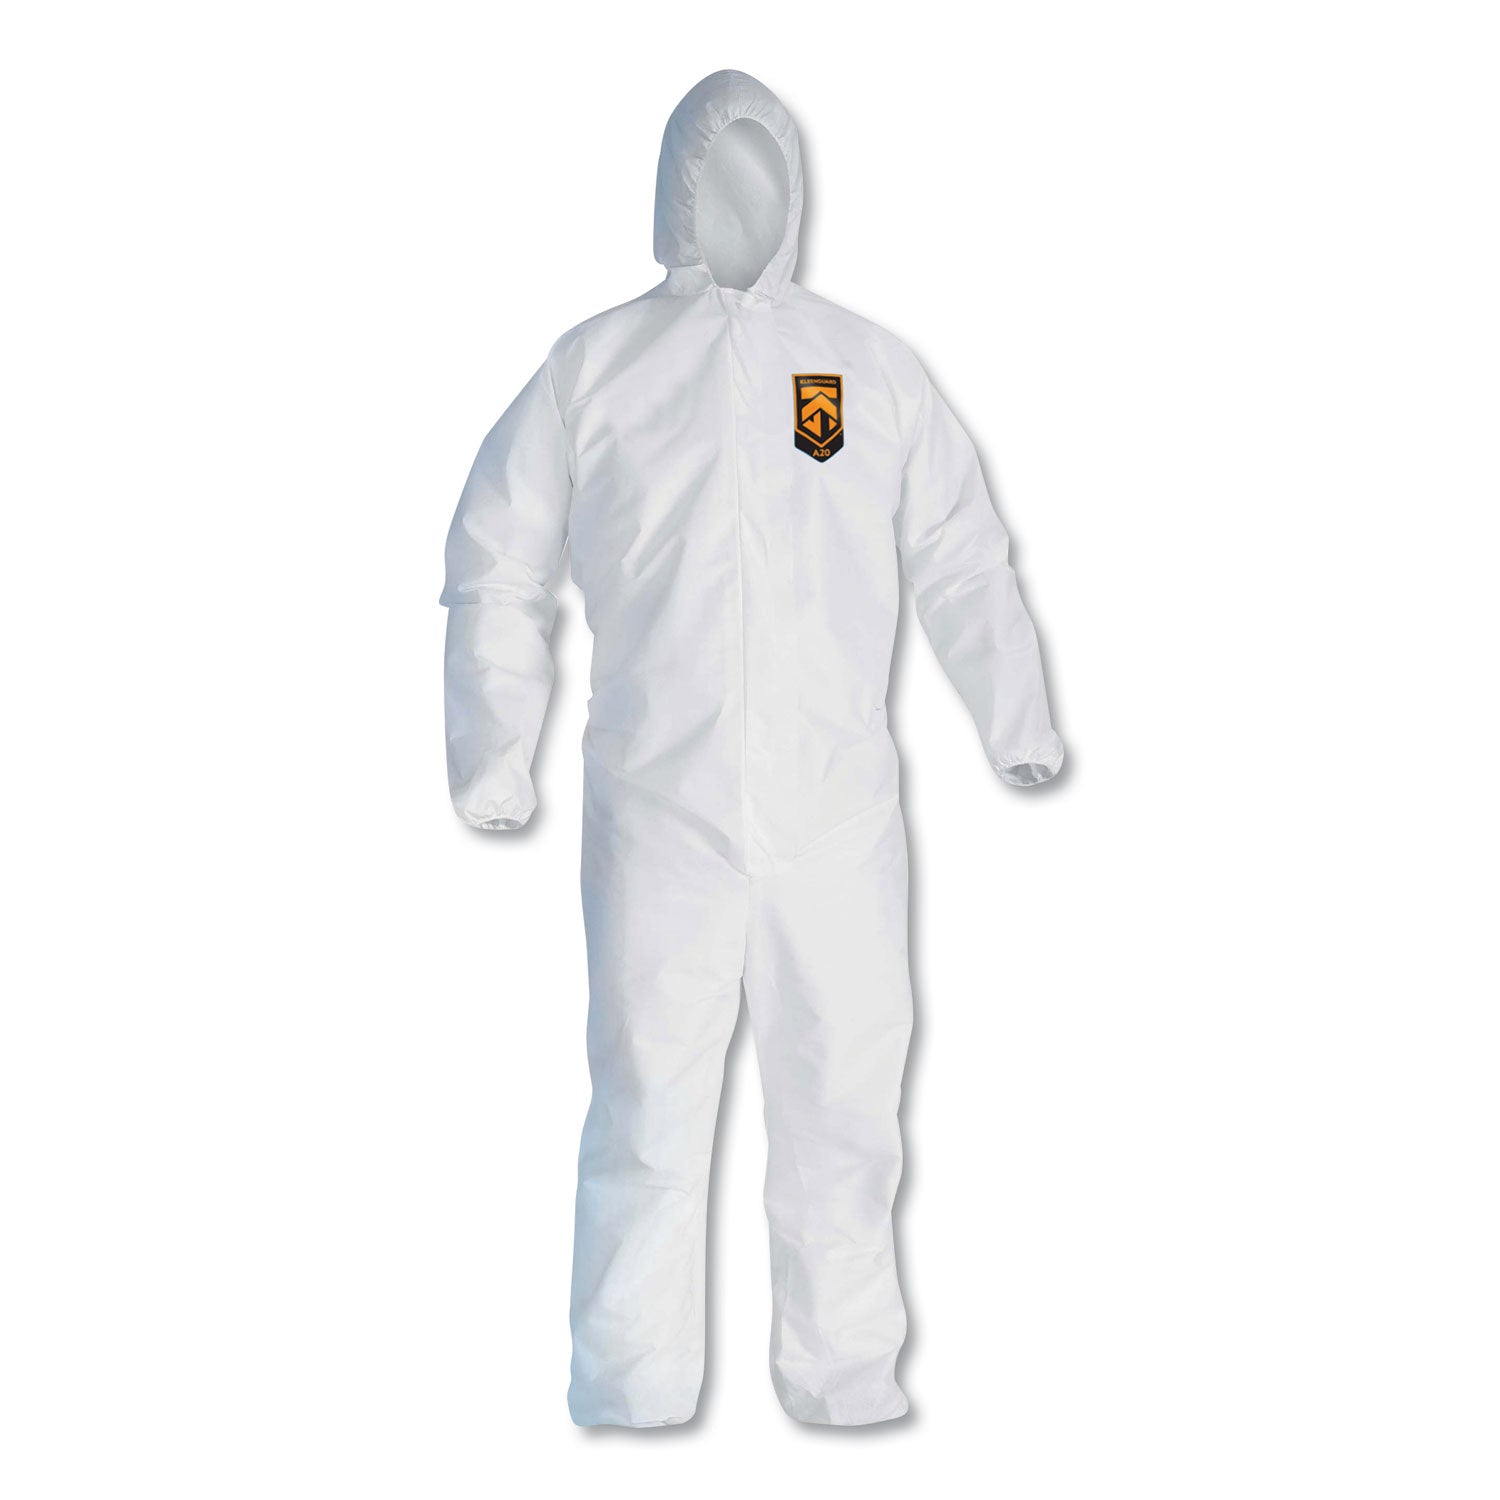 a20-breathable-particle-protection-coveralls-zip-closure-3x-large-white_kcc49116 - 1